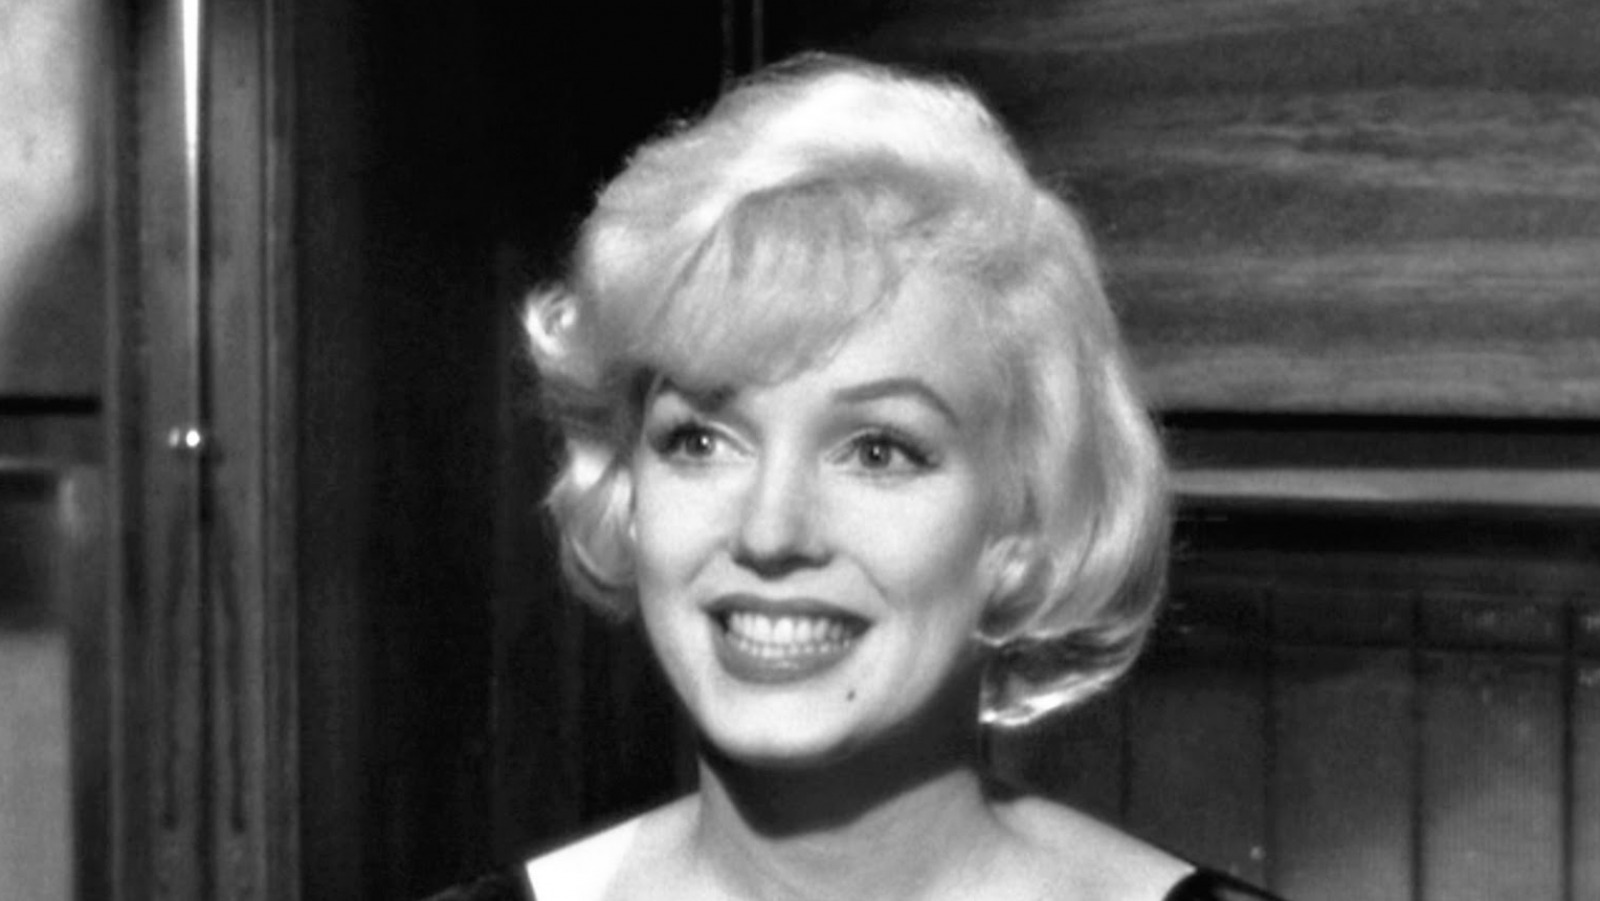 Marilyn Monroe's Last Ever Movie Scene And Last Public Appearance At An  event June 1st 1962 